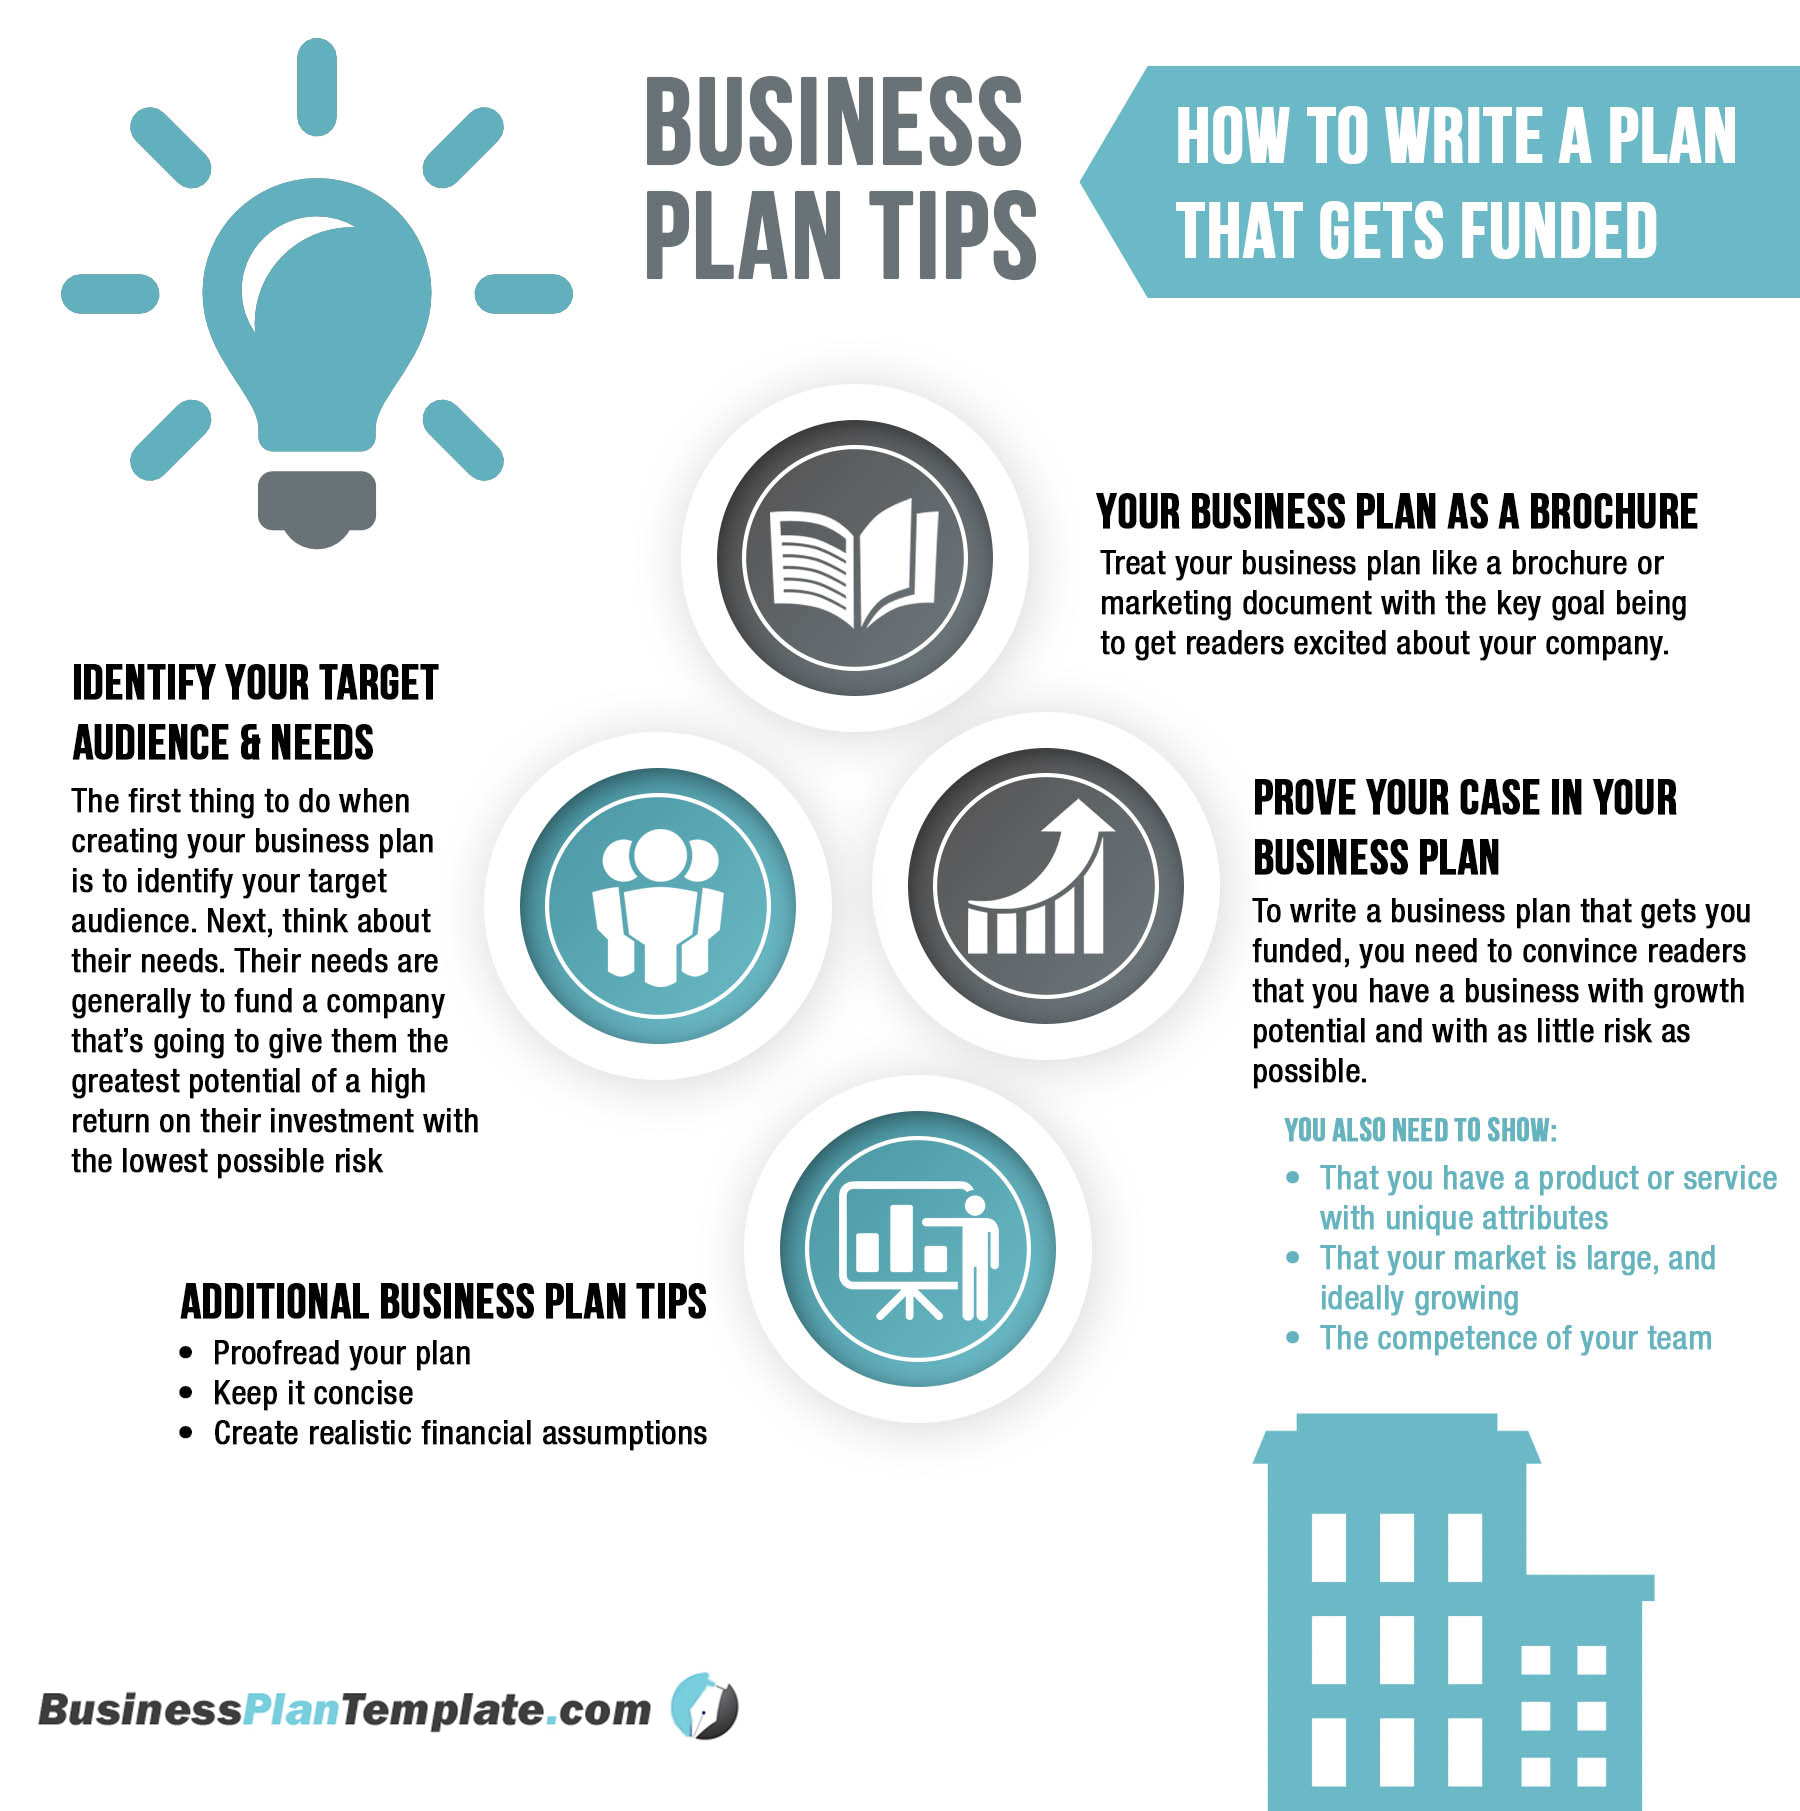 7 Essential Sections of a Business Plan [infographic] | NFIB | Business plan infographic, How to ...